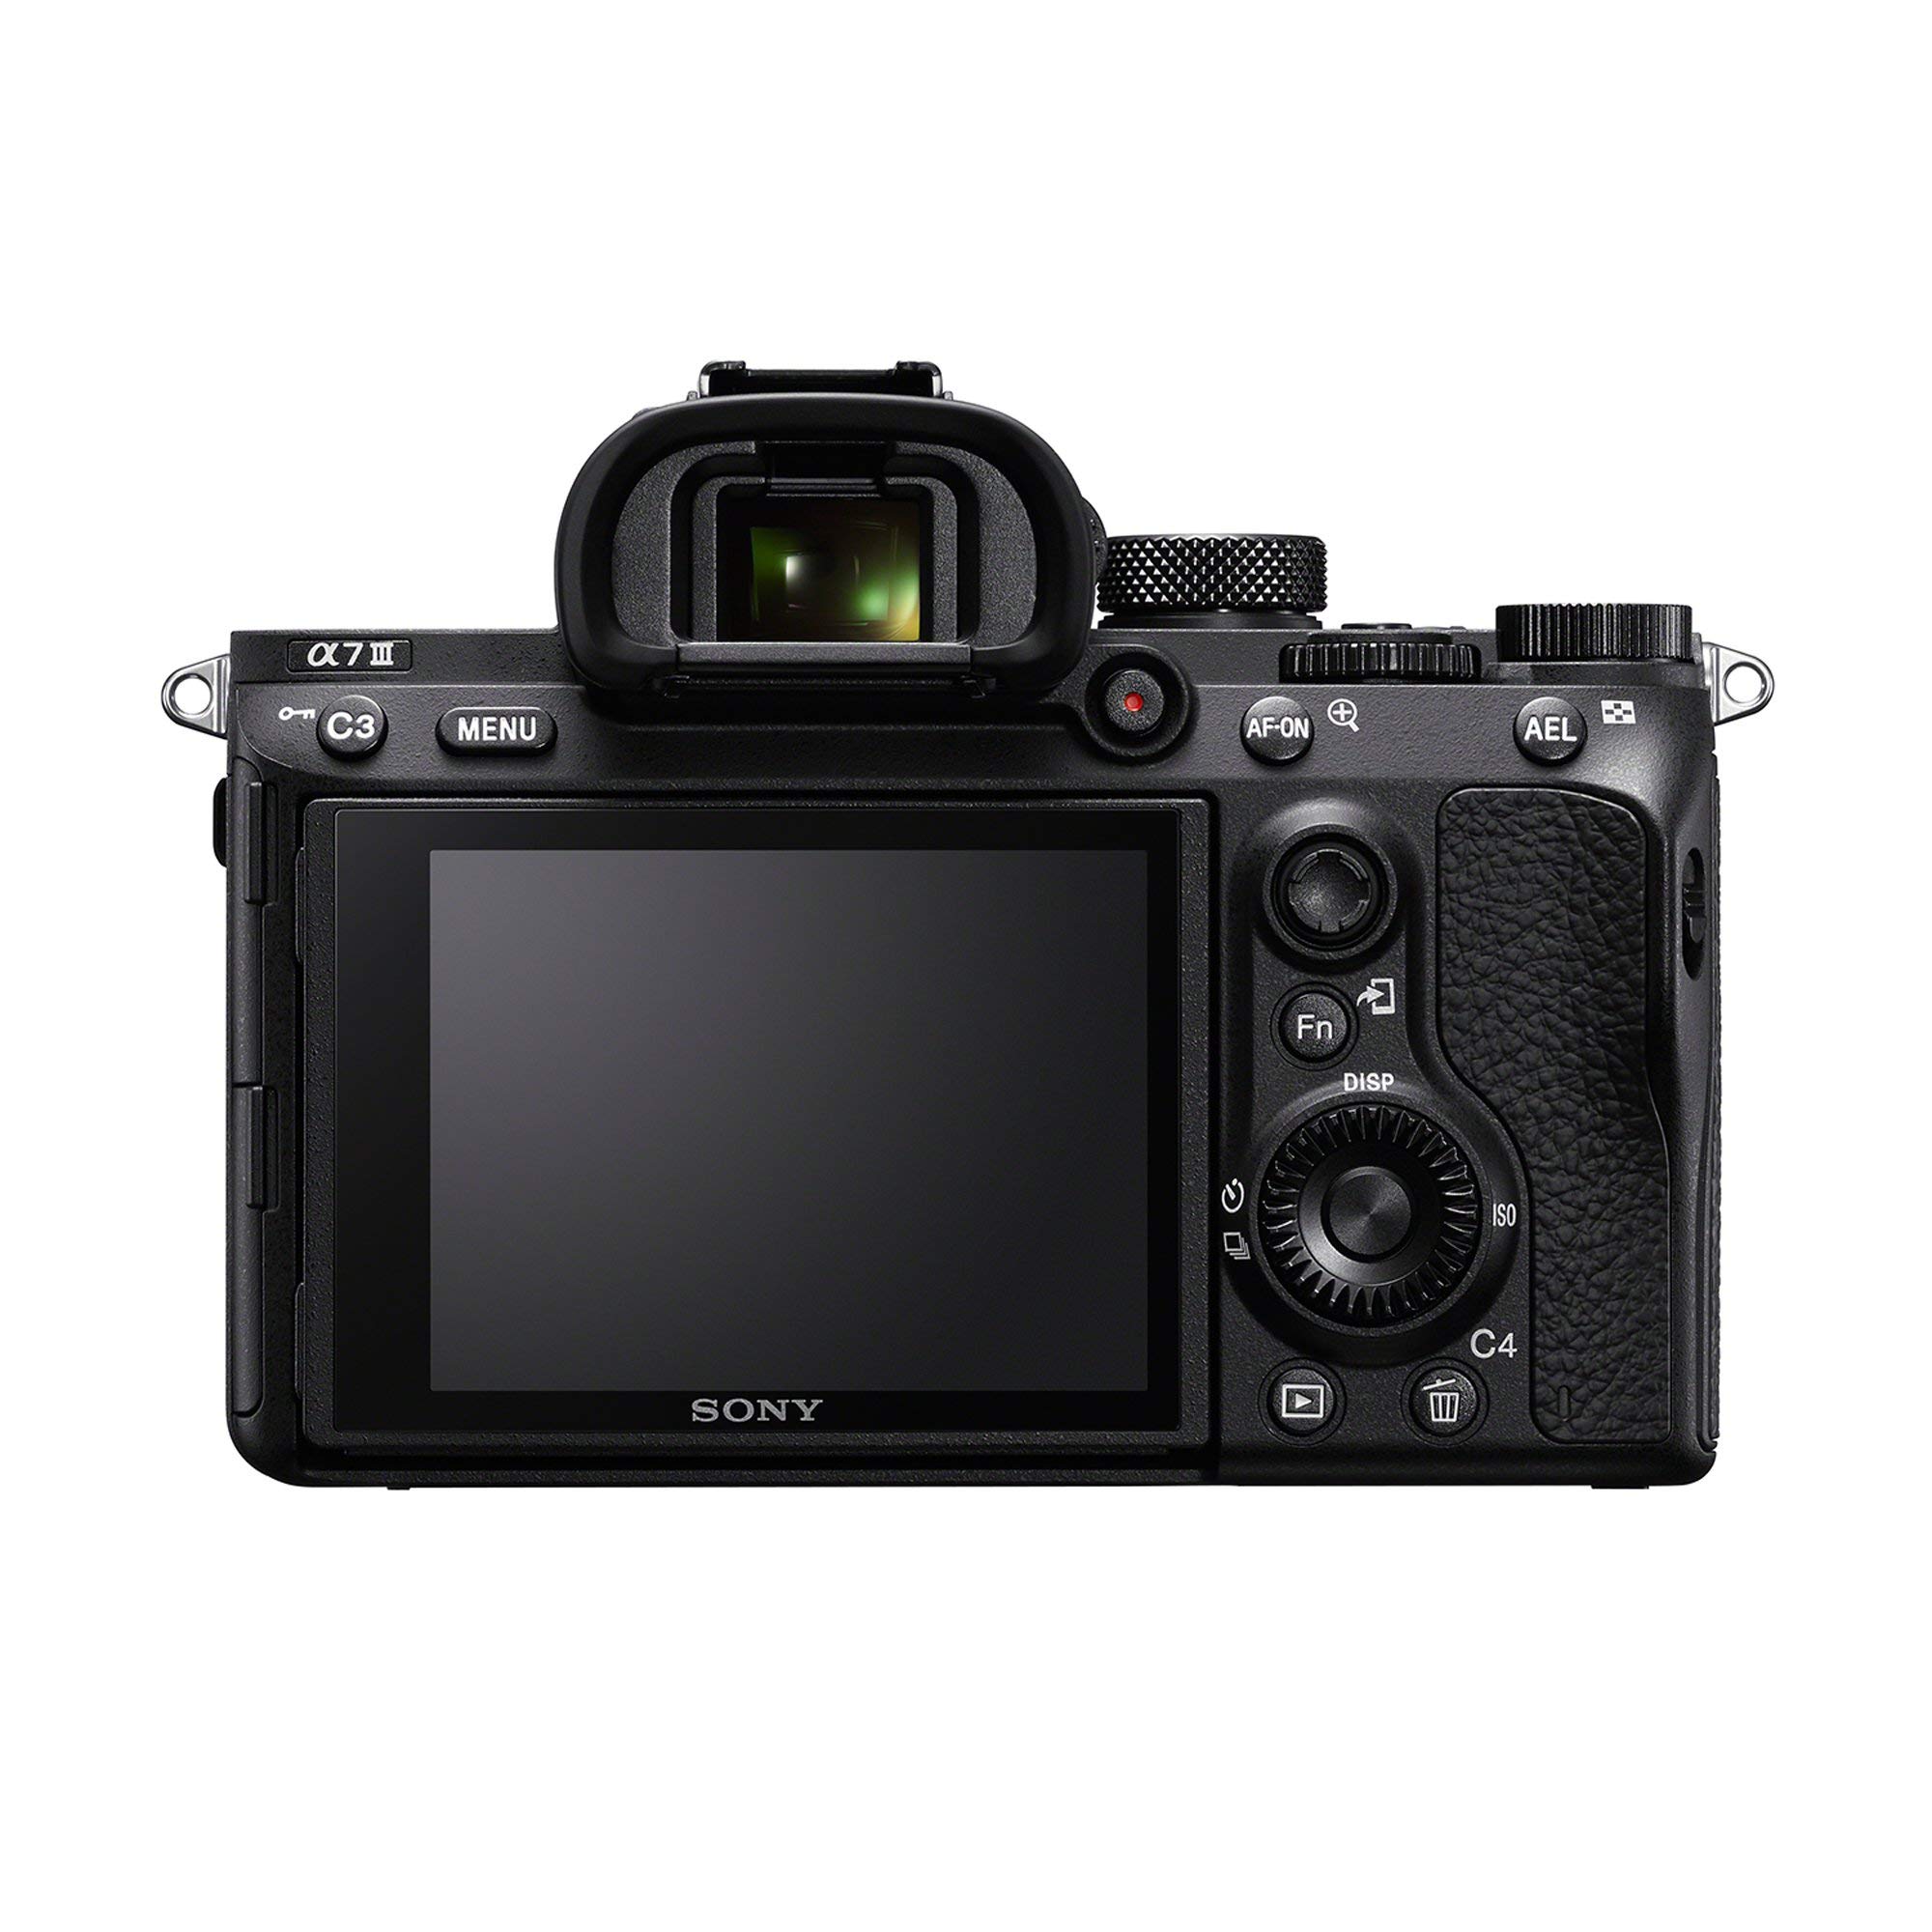 SONY a7 III Full-Frame Mirrorless Interchangeable-Lens Camera Optical with 3-Inch LCD, Black (ILCE7M3/B) (Renewed)